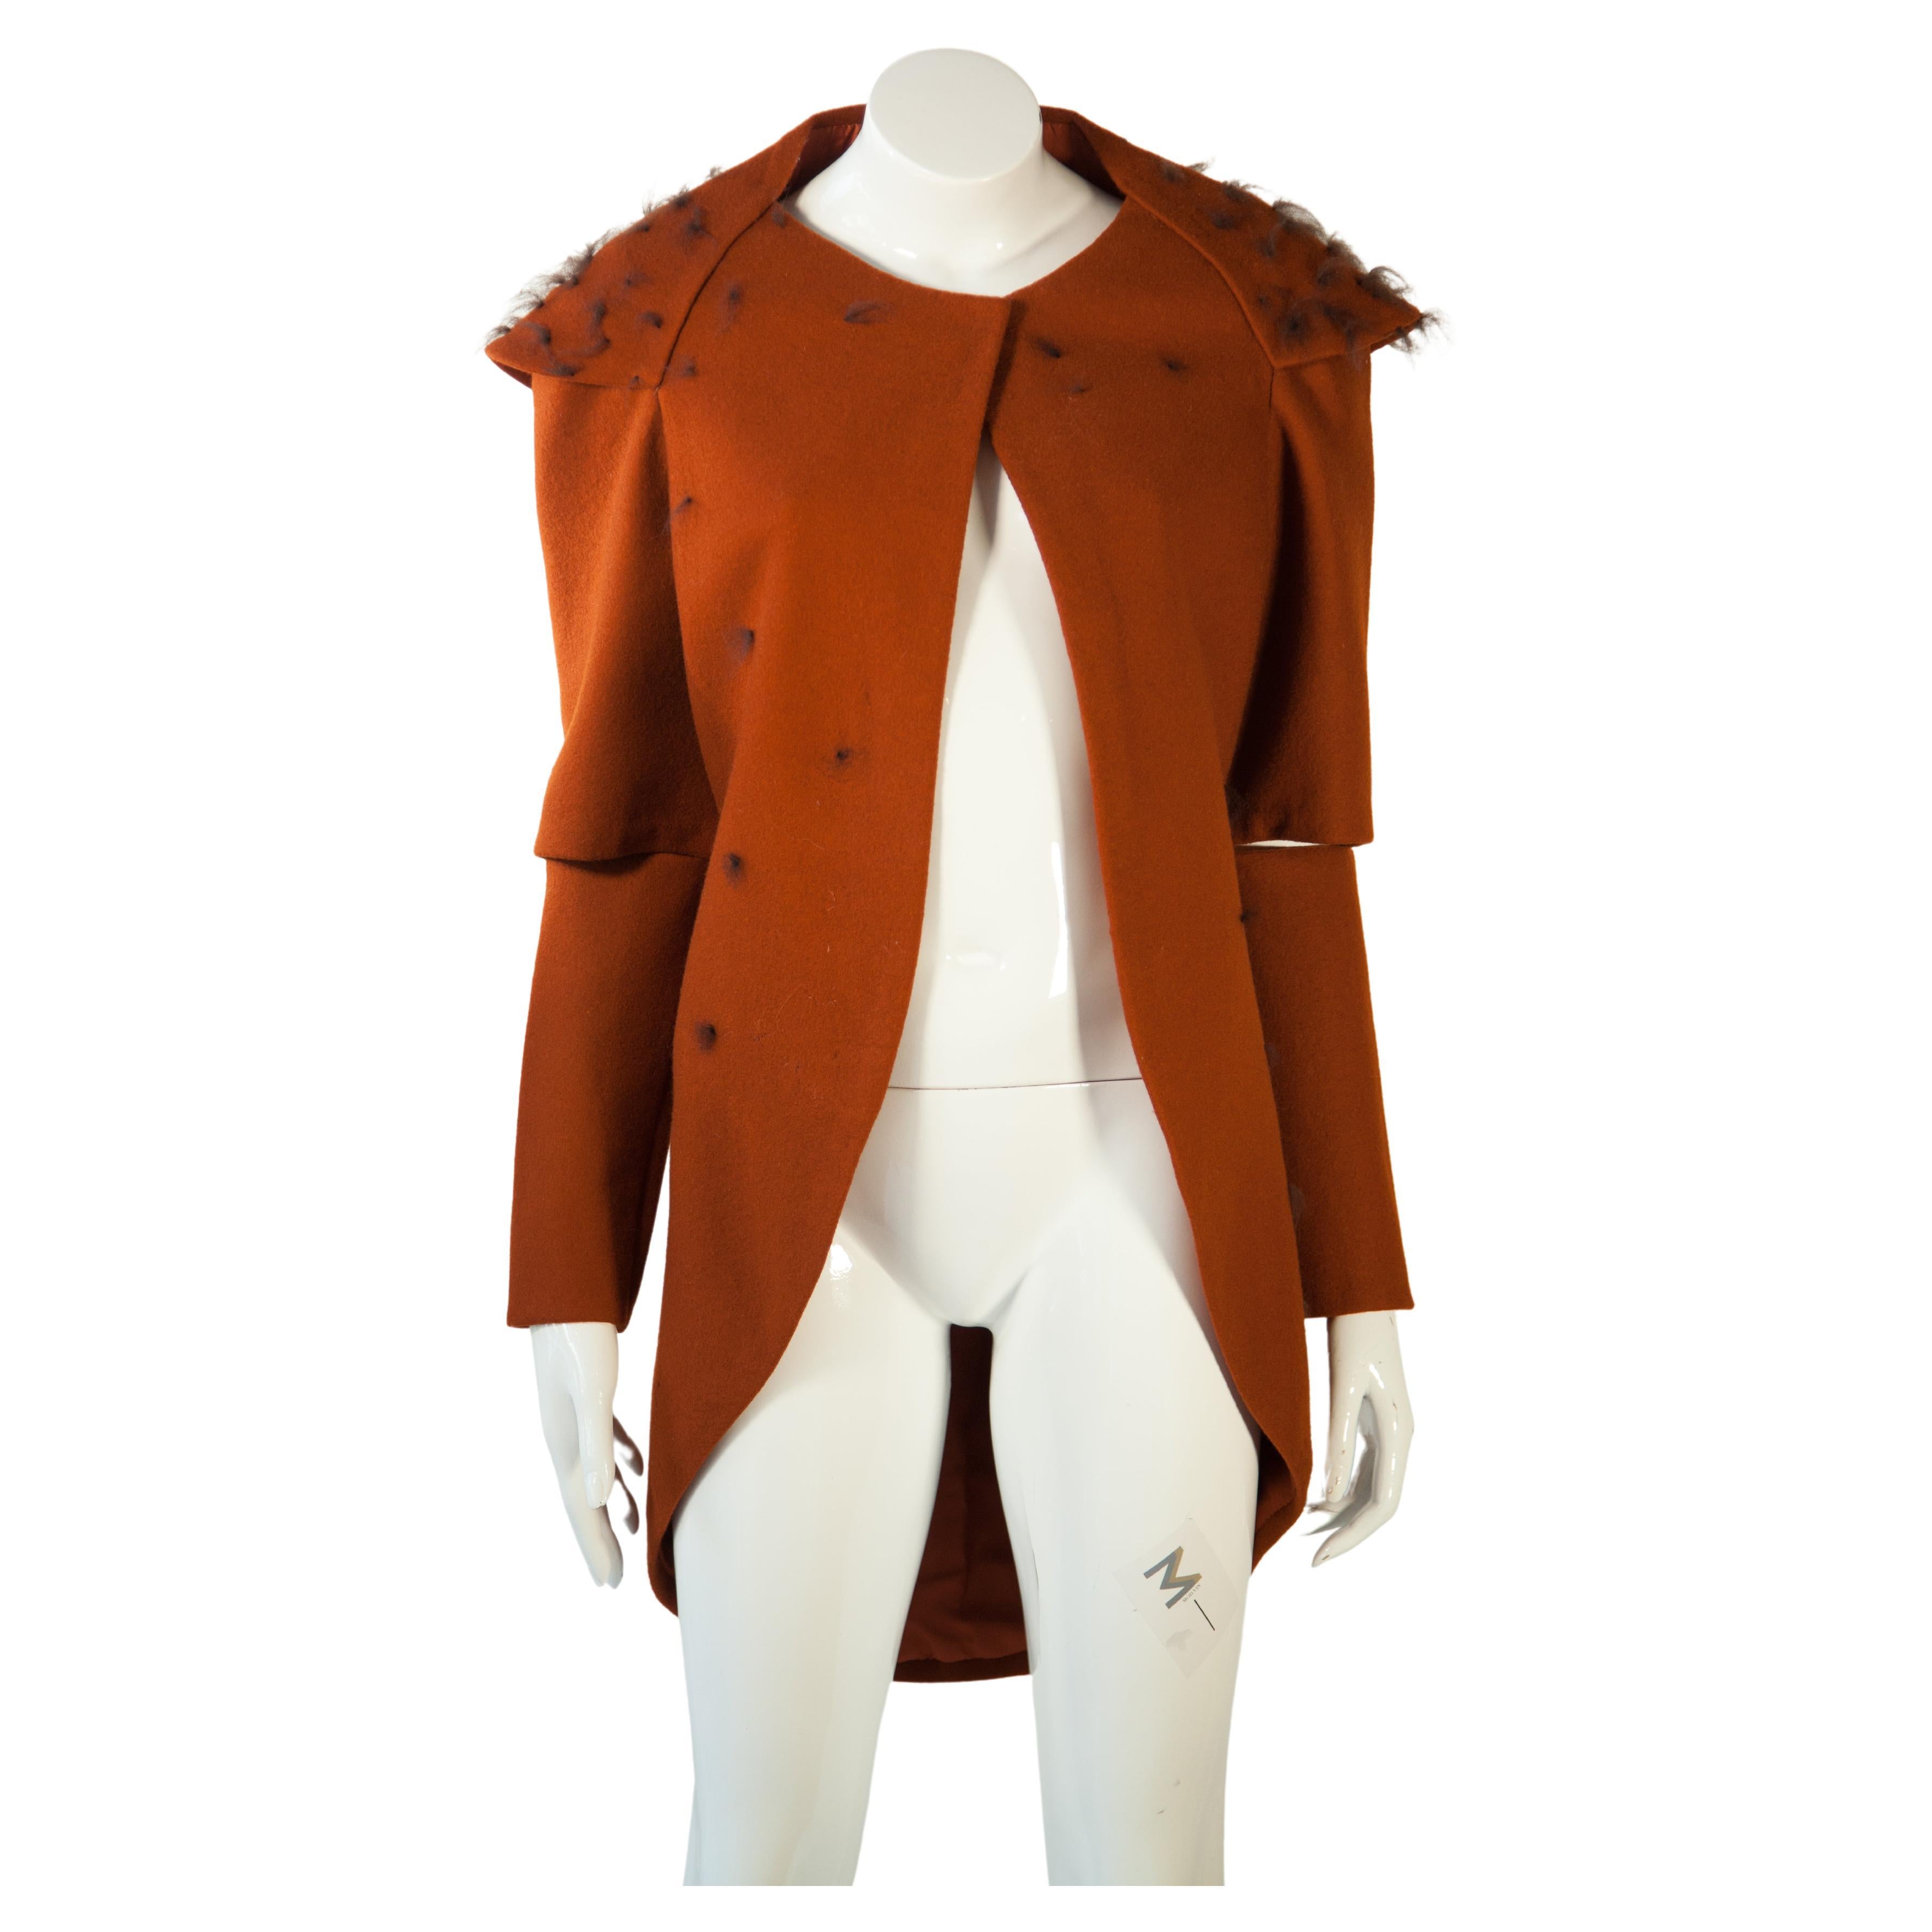 Italian Dovetail Orange-Brown Felt Jacket with Detachable Sleeves and Fur Detail